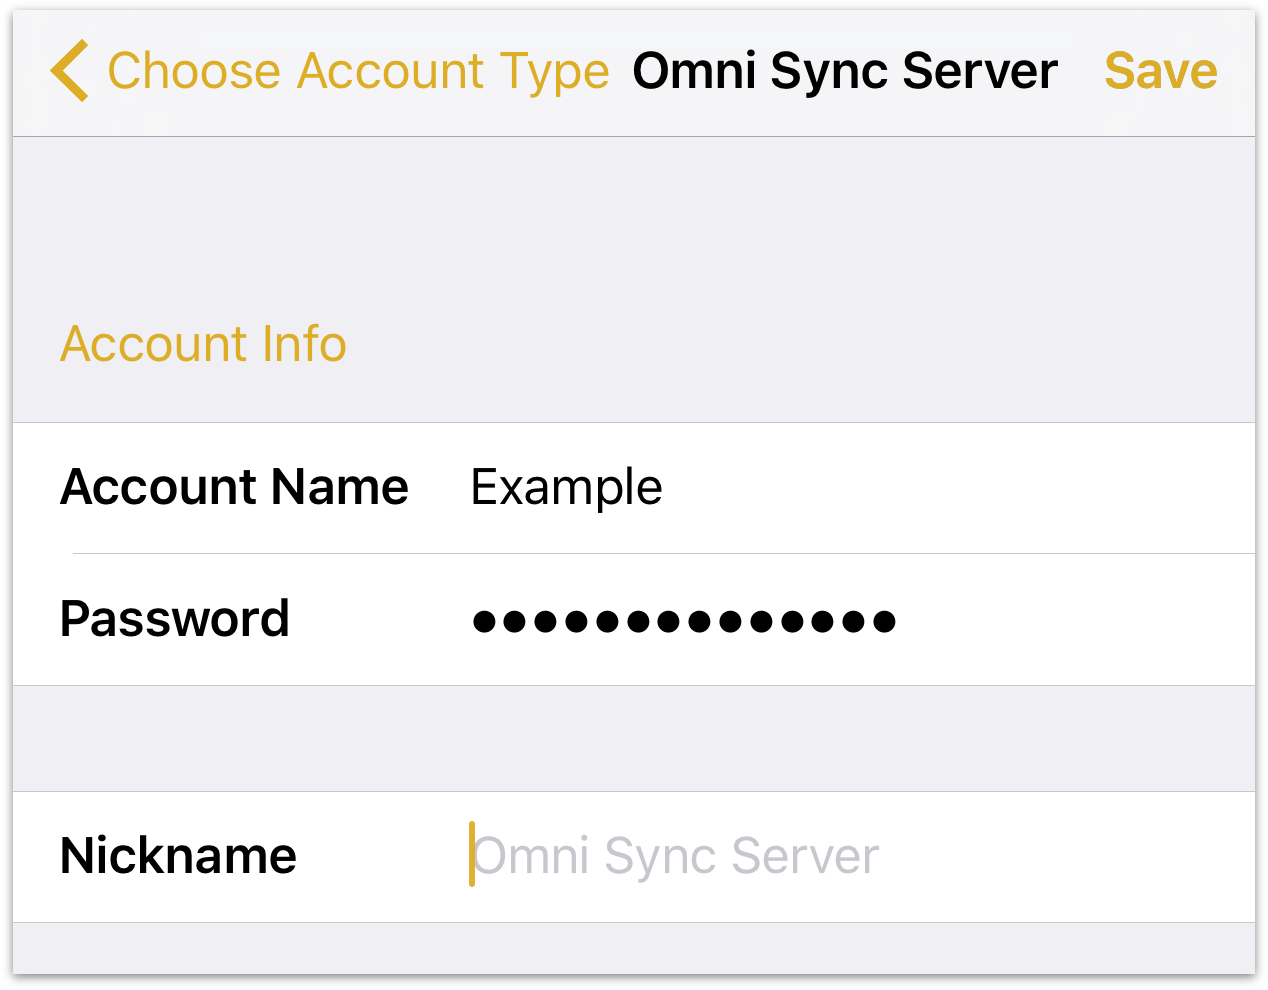 Enter the credentials for your Omni Sync Server account.